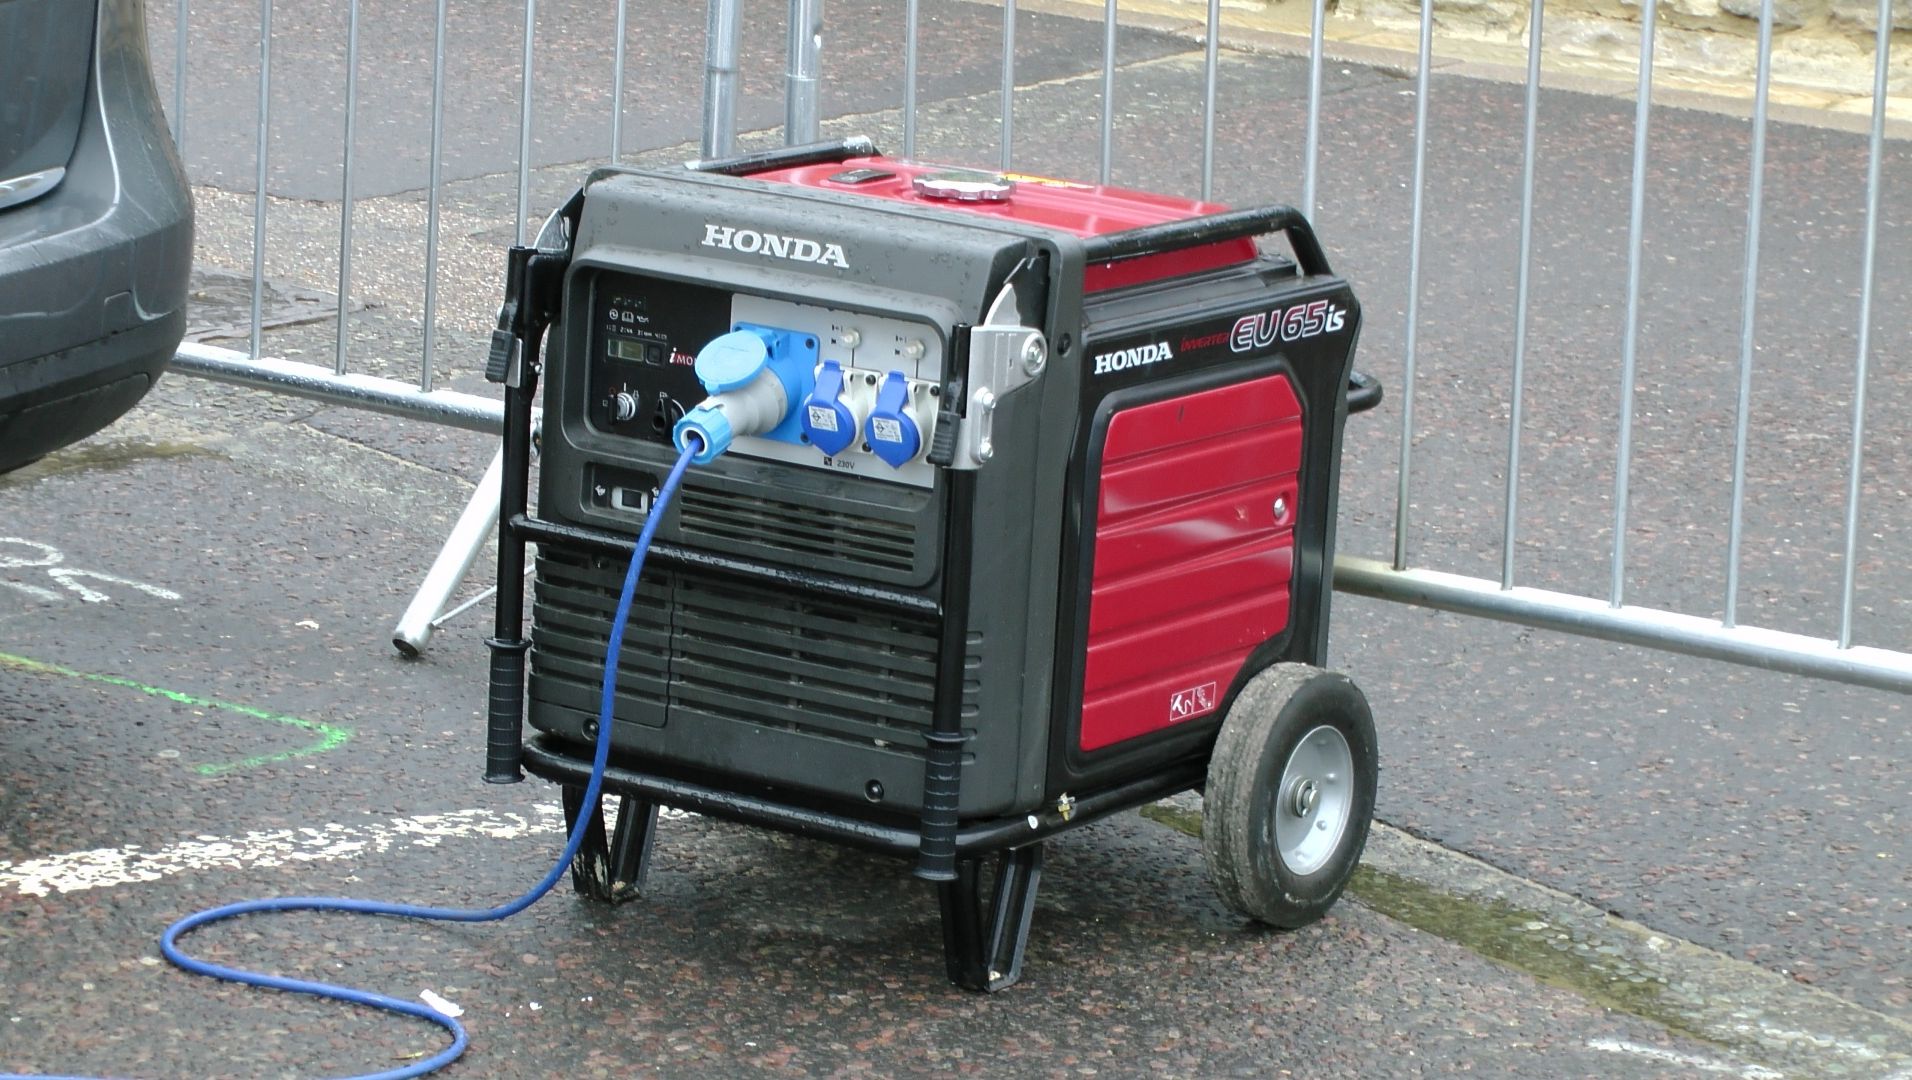 One of our generators